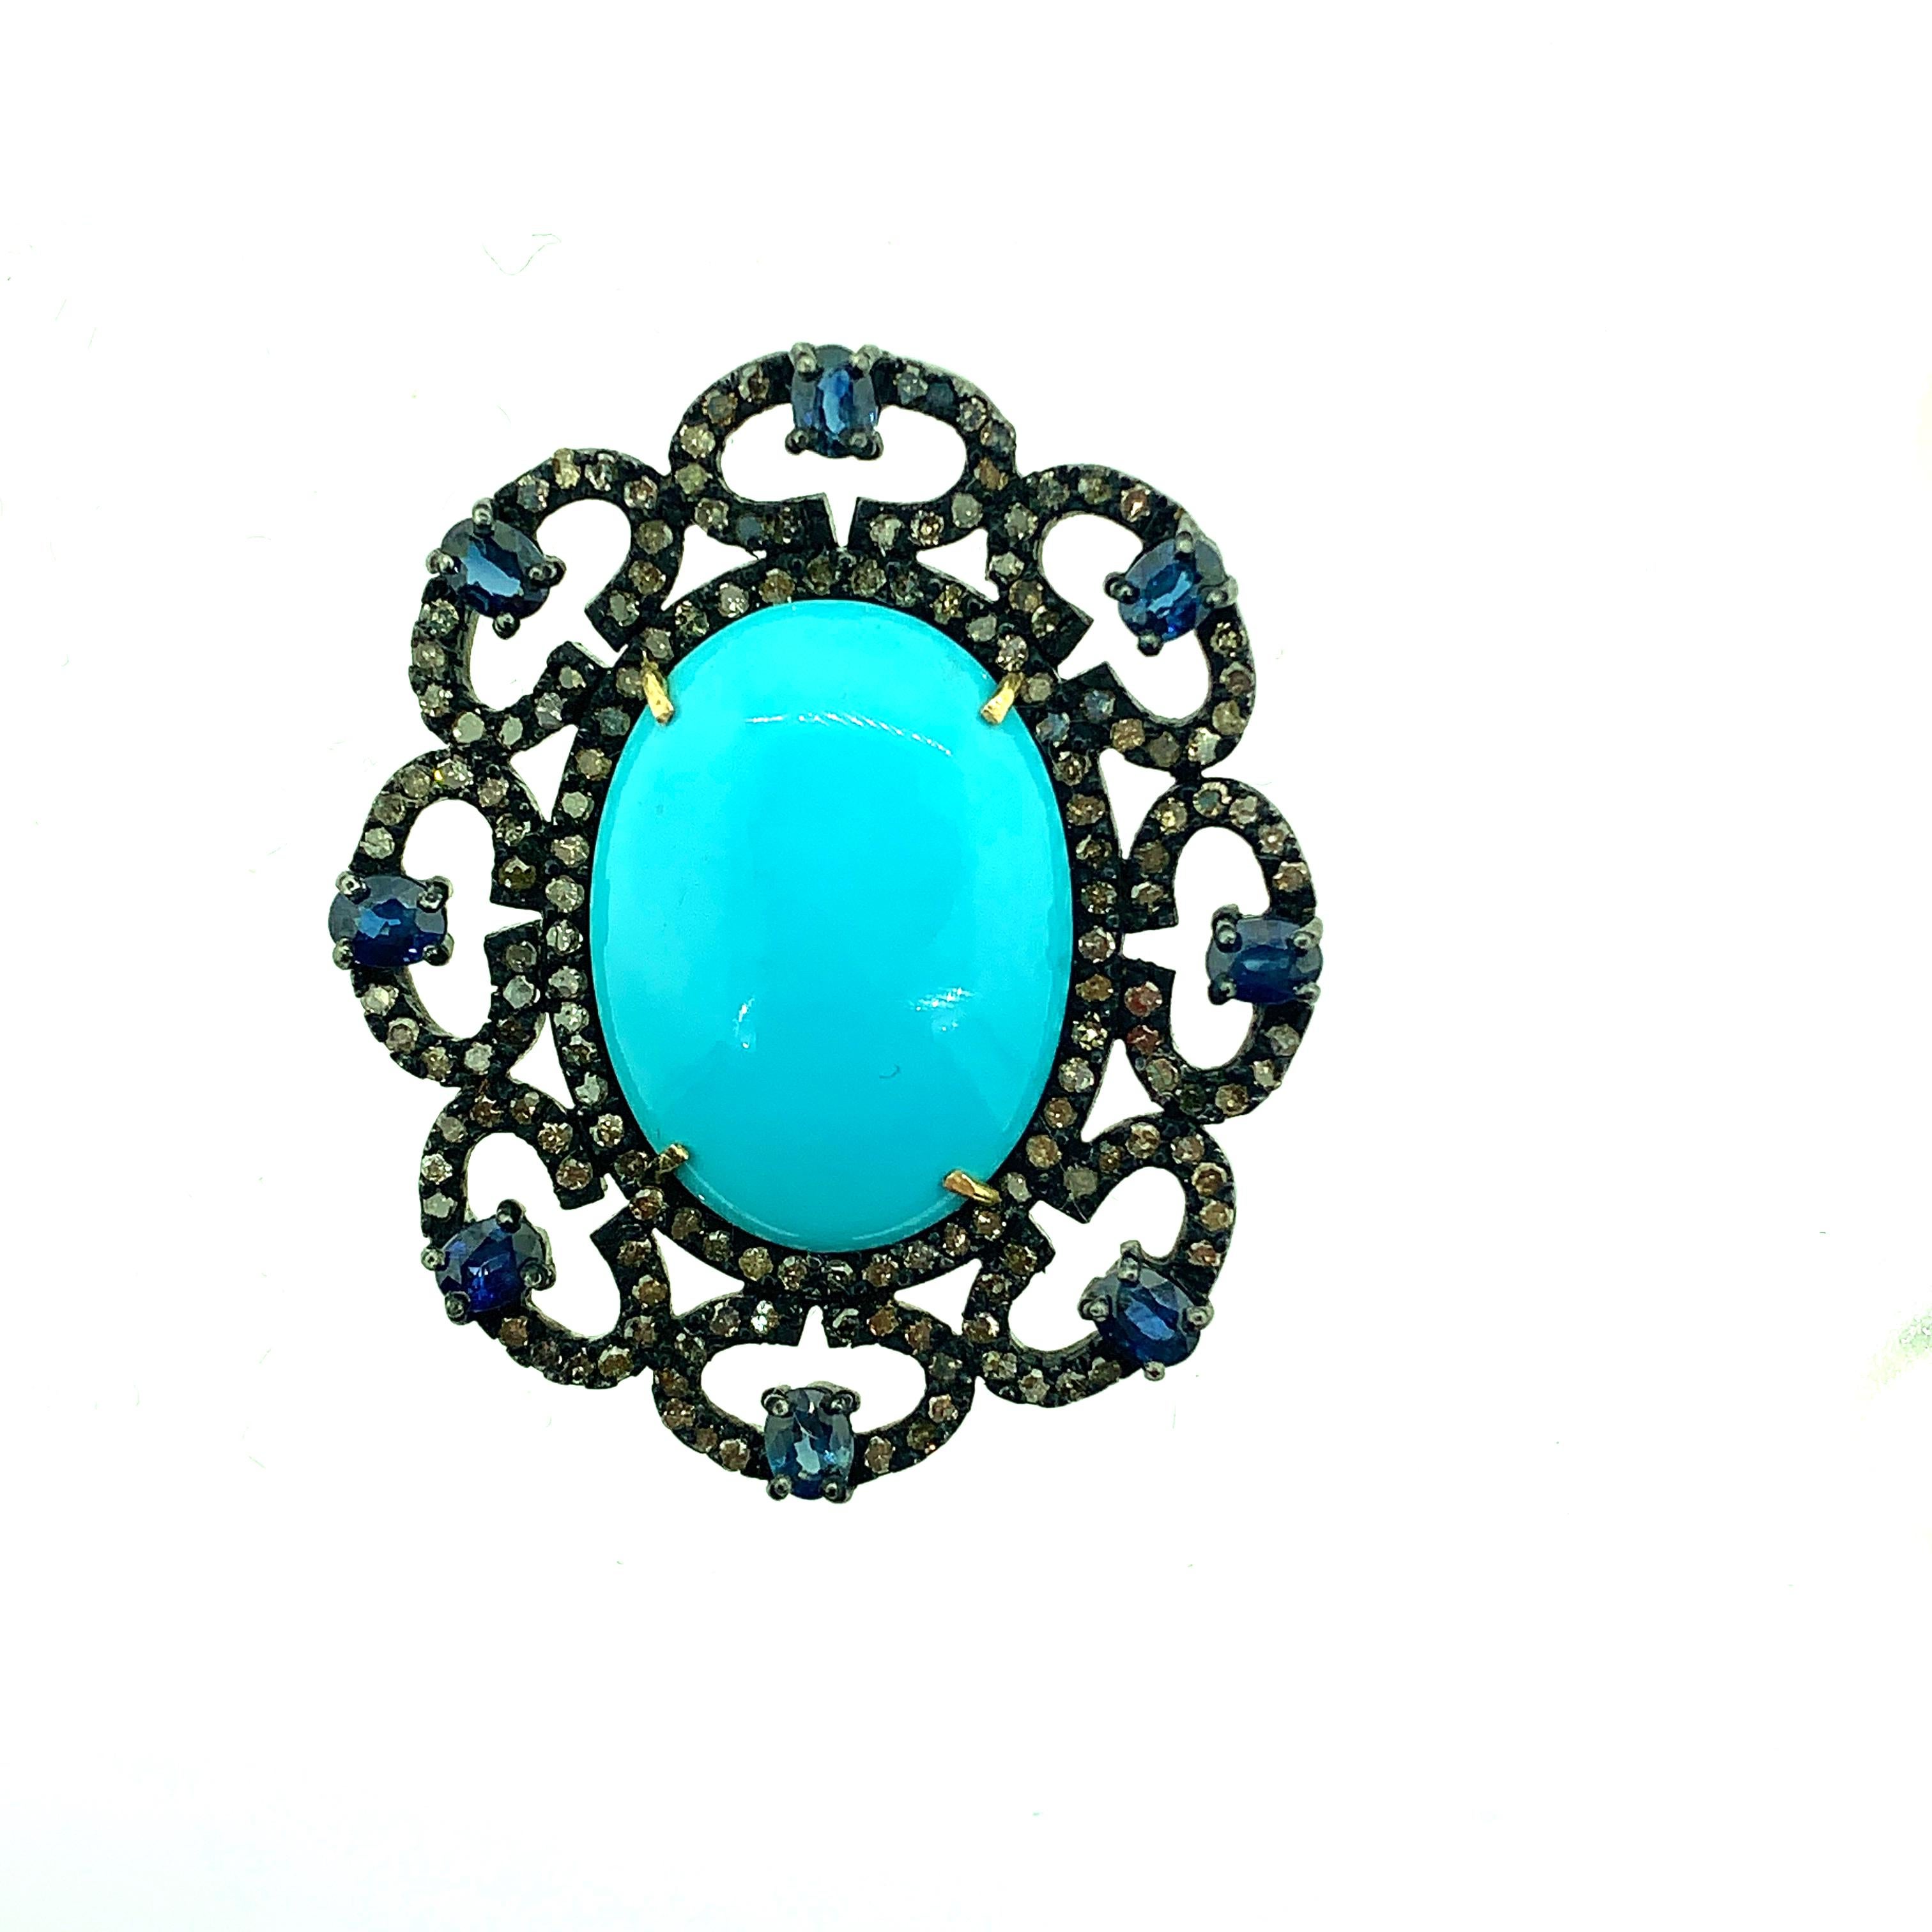 Contemporary 15.86 Carat Turquoise, 2.17Ct Sapphire and Pave Diamond Ring Silver, 14Kt Gold For Sale